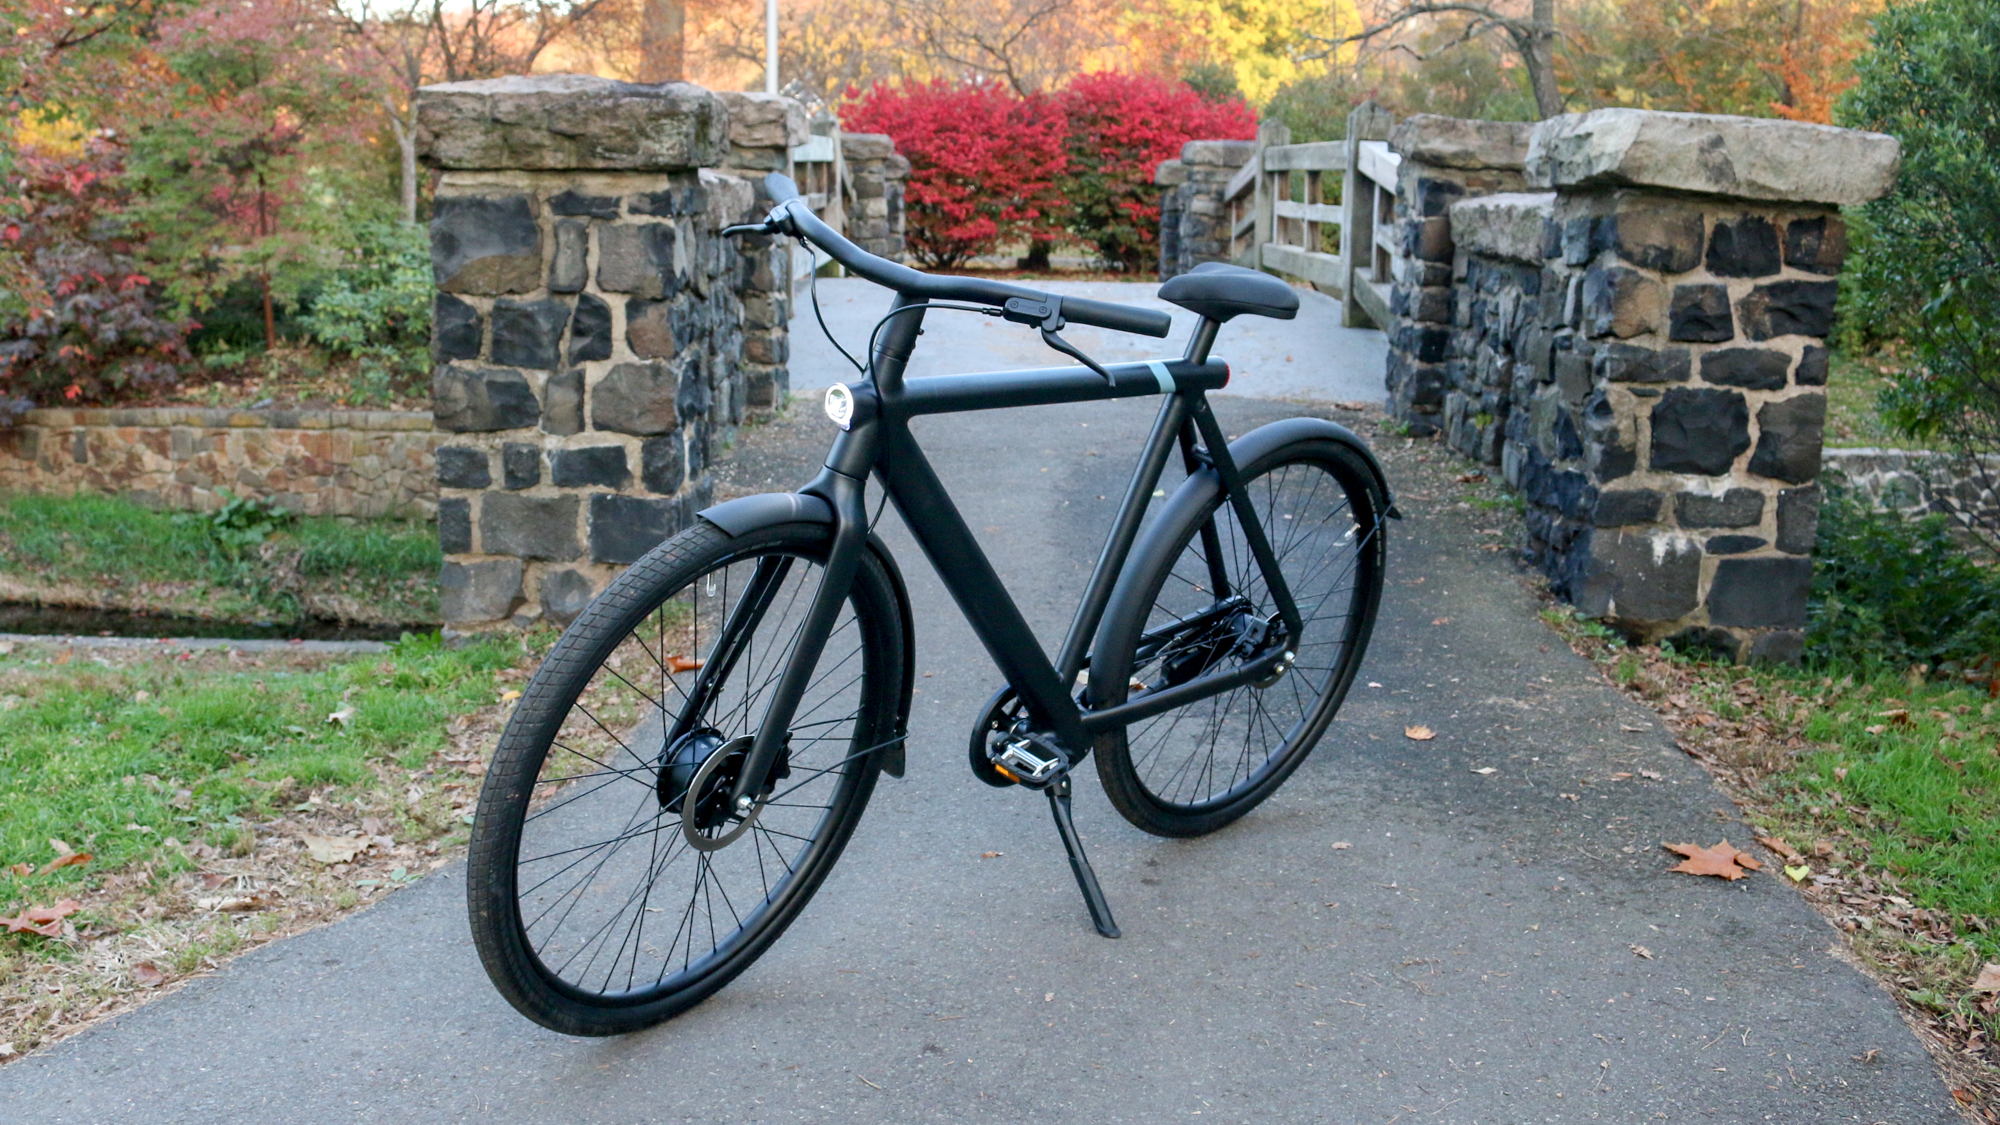 vanmoof removable battery